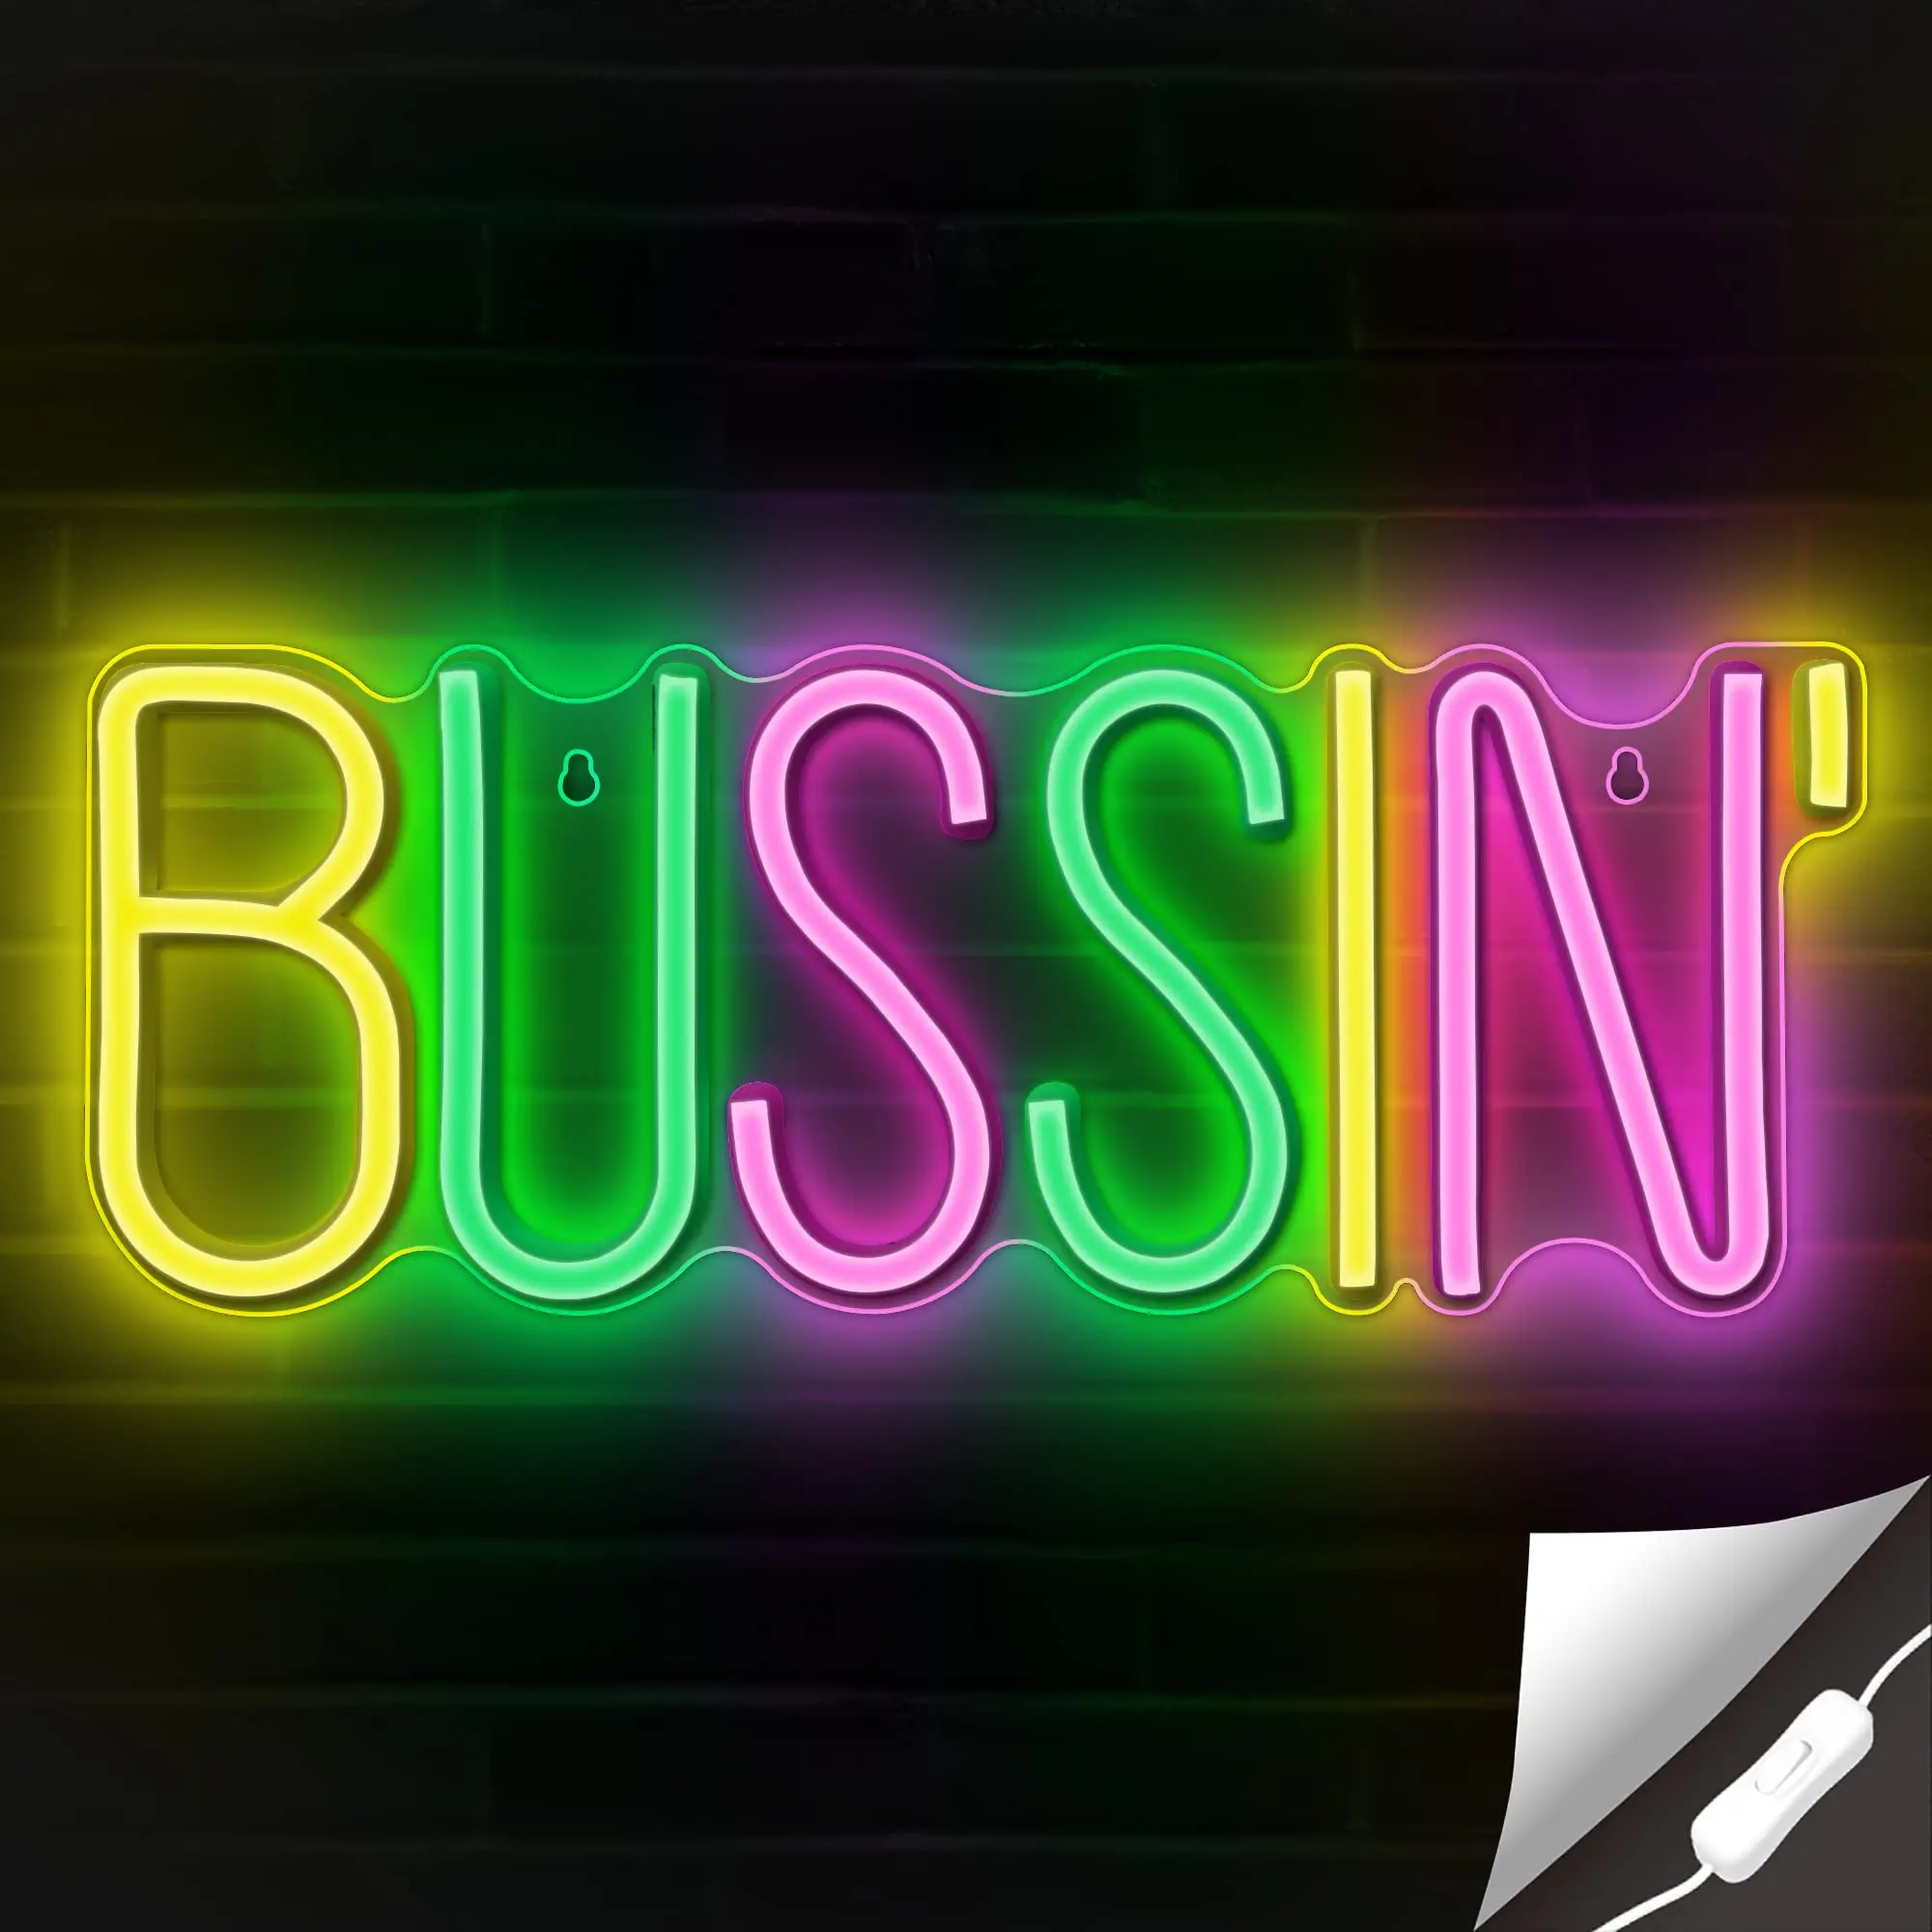 

Bussin Neon Sign - Bussin Led Neon Lights for Gamers Led Signs for Wall Bedroom, Game Room Boy Gift Decor